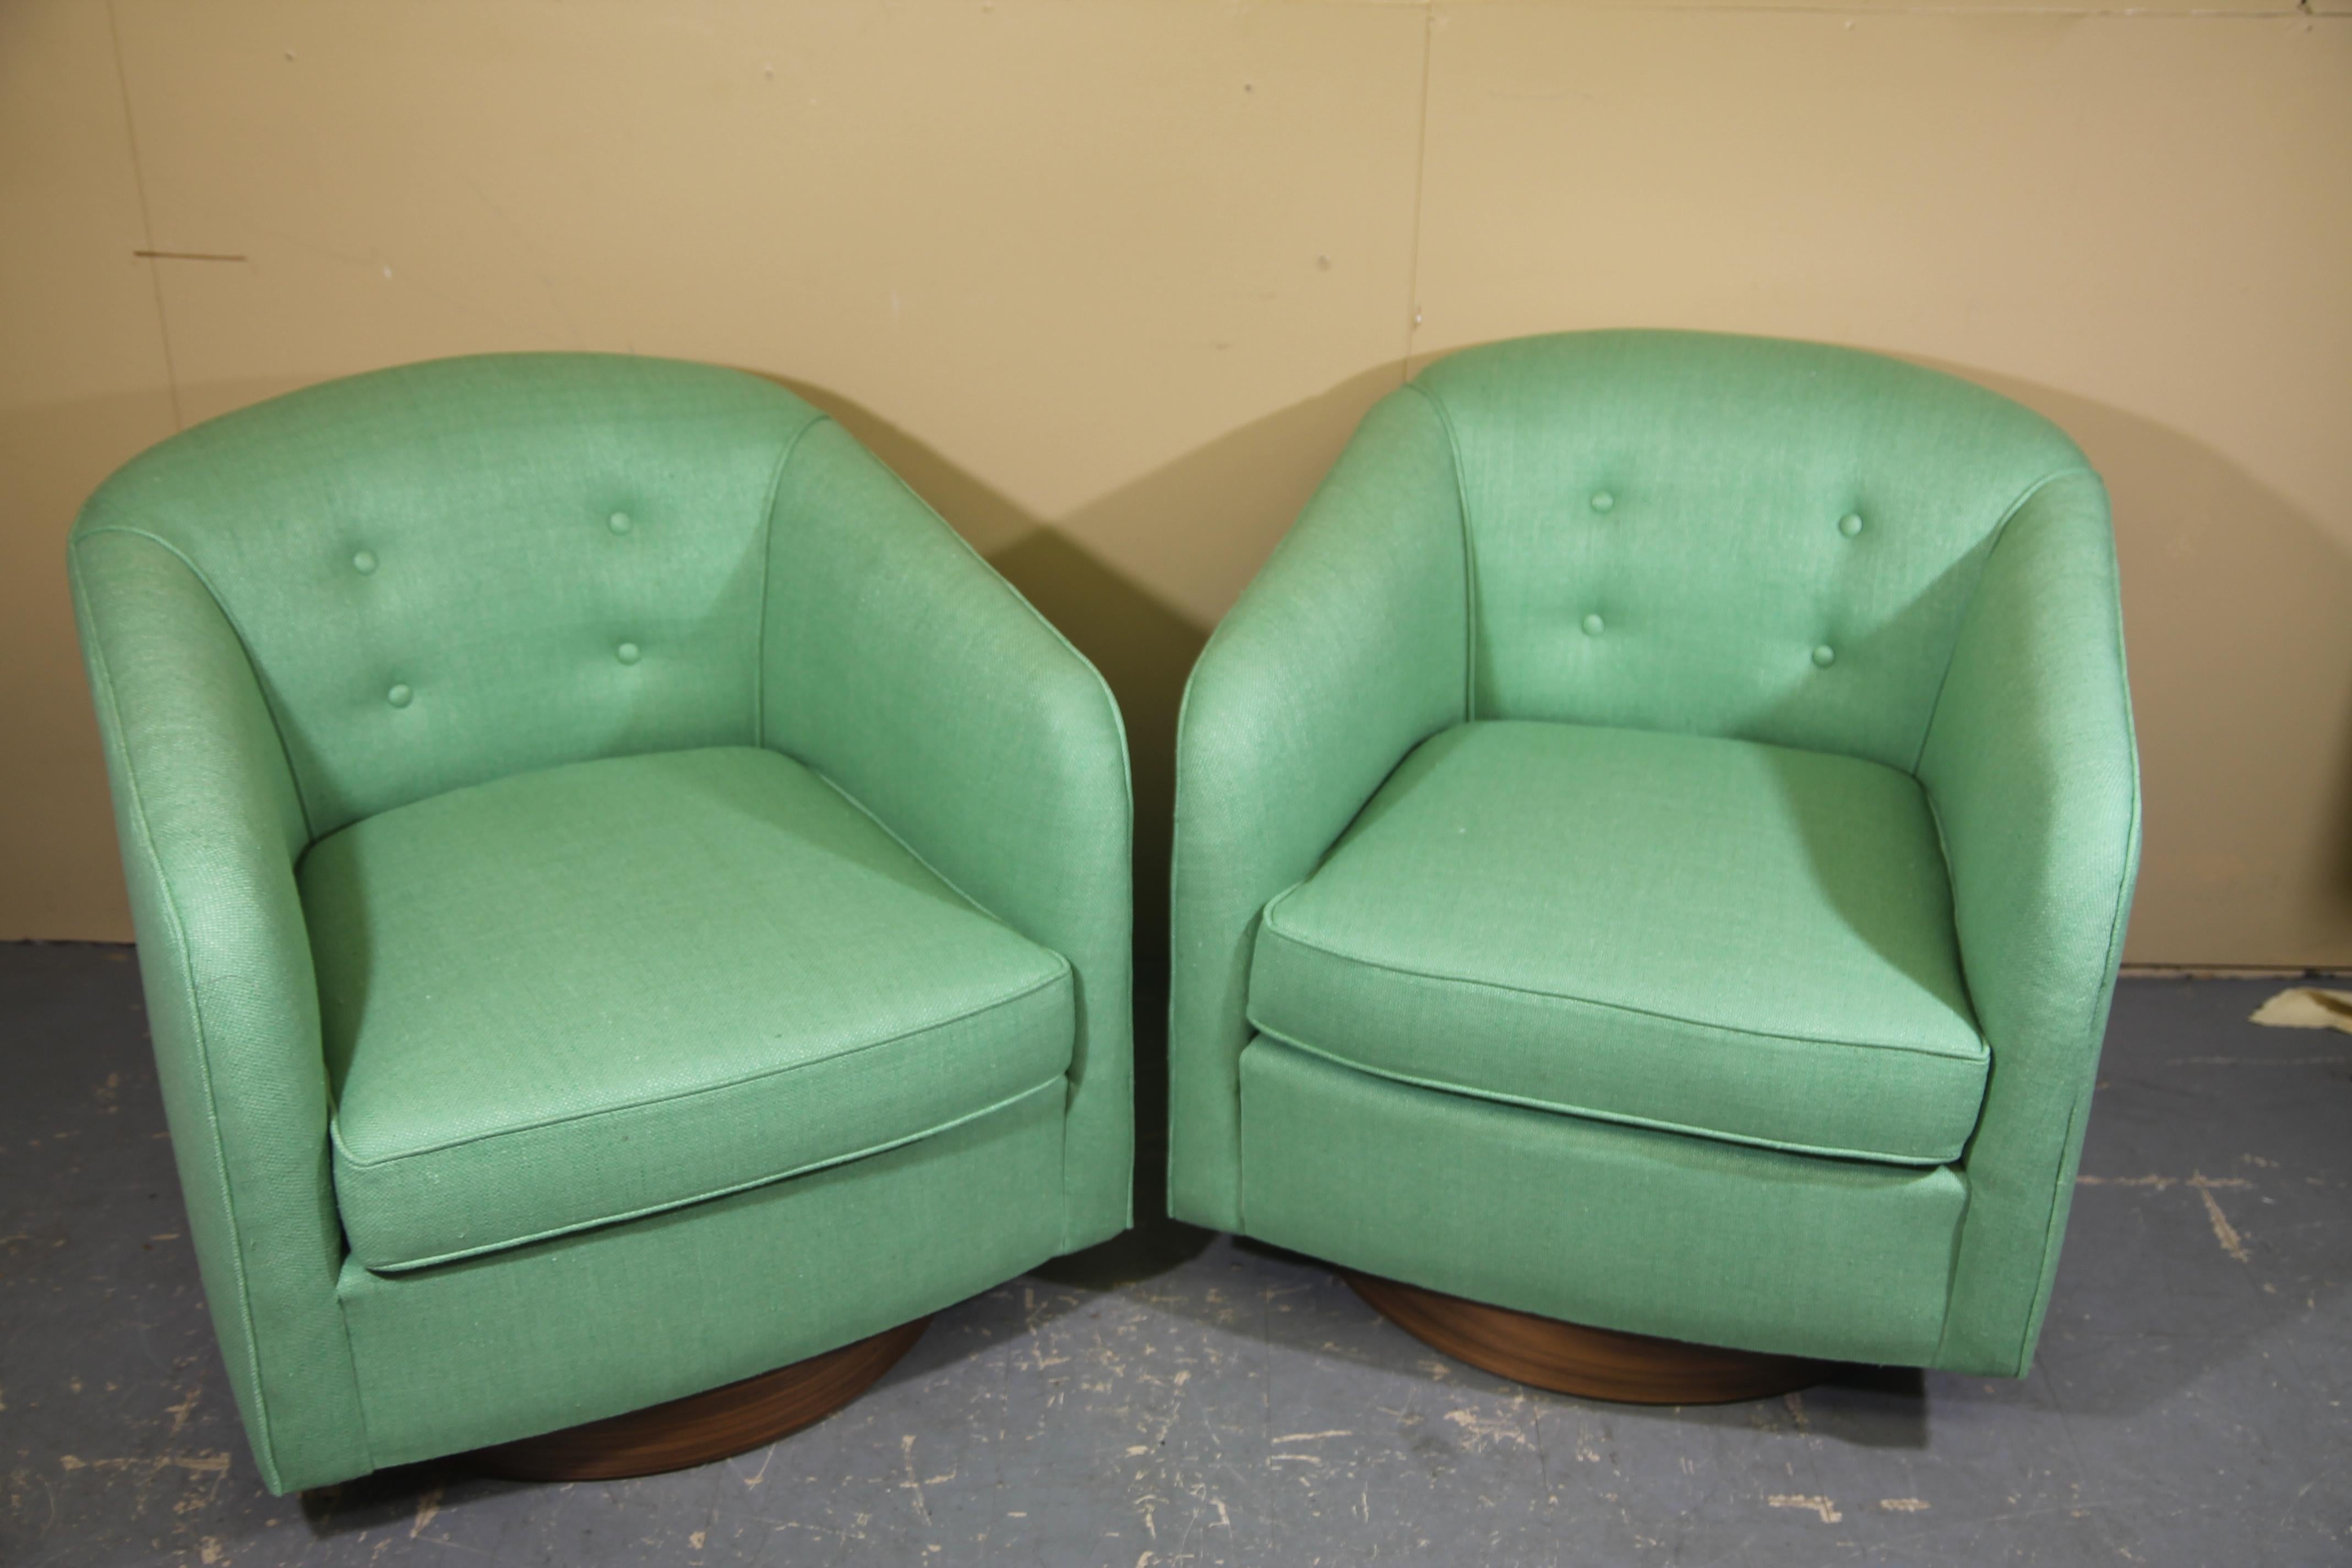 I’m pleased to offer these freshly refurbished green lounge chairs in the style of Milo Baughman. These swivel lounge chairs have been newly redone in vintage green fabric. These are super comfortable and a pleasure to look at.